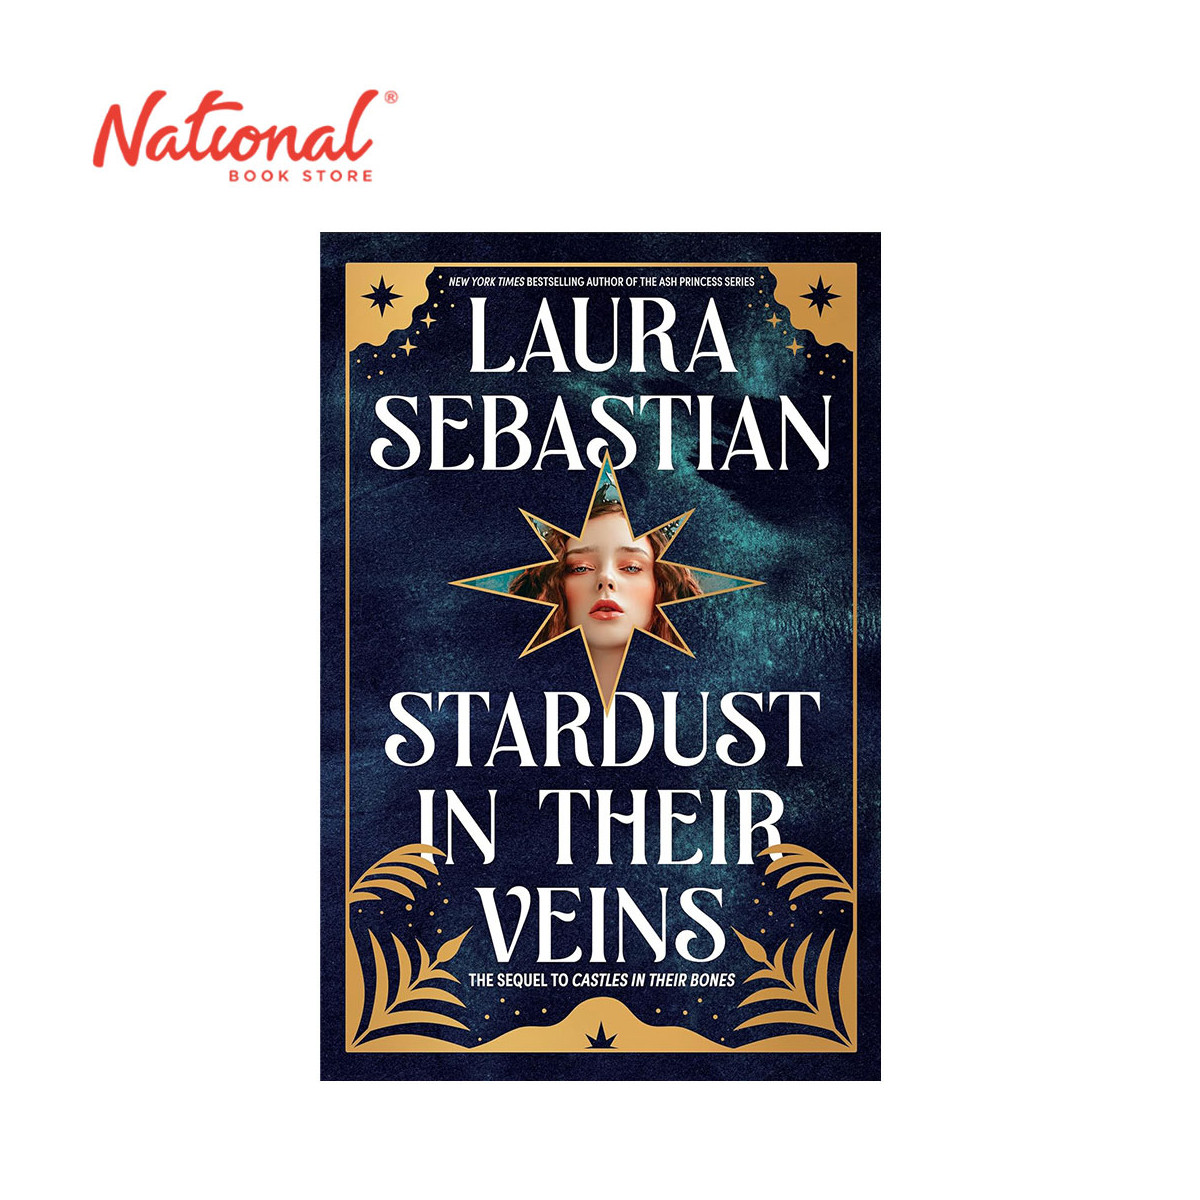 Stardust In Their Veins by Laura Sebastian - Trade Paperback - Teens Fiction